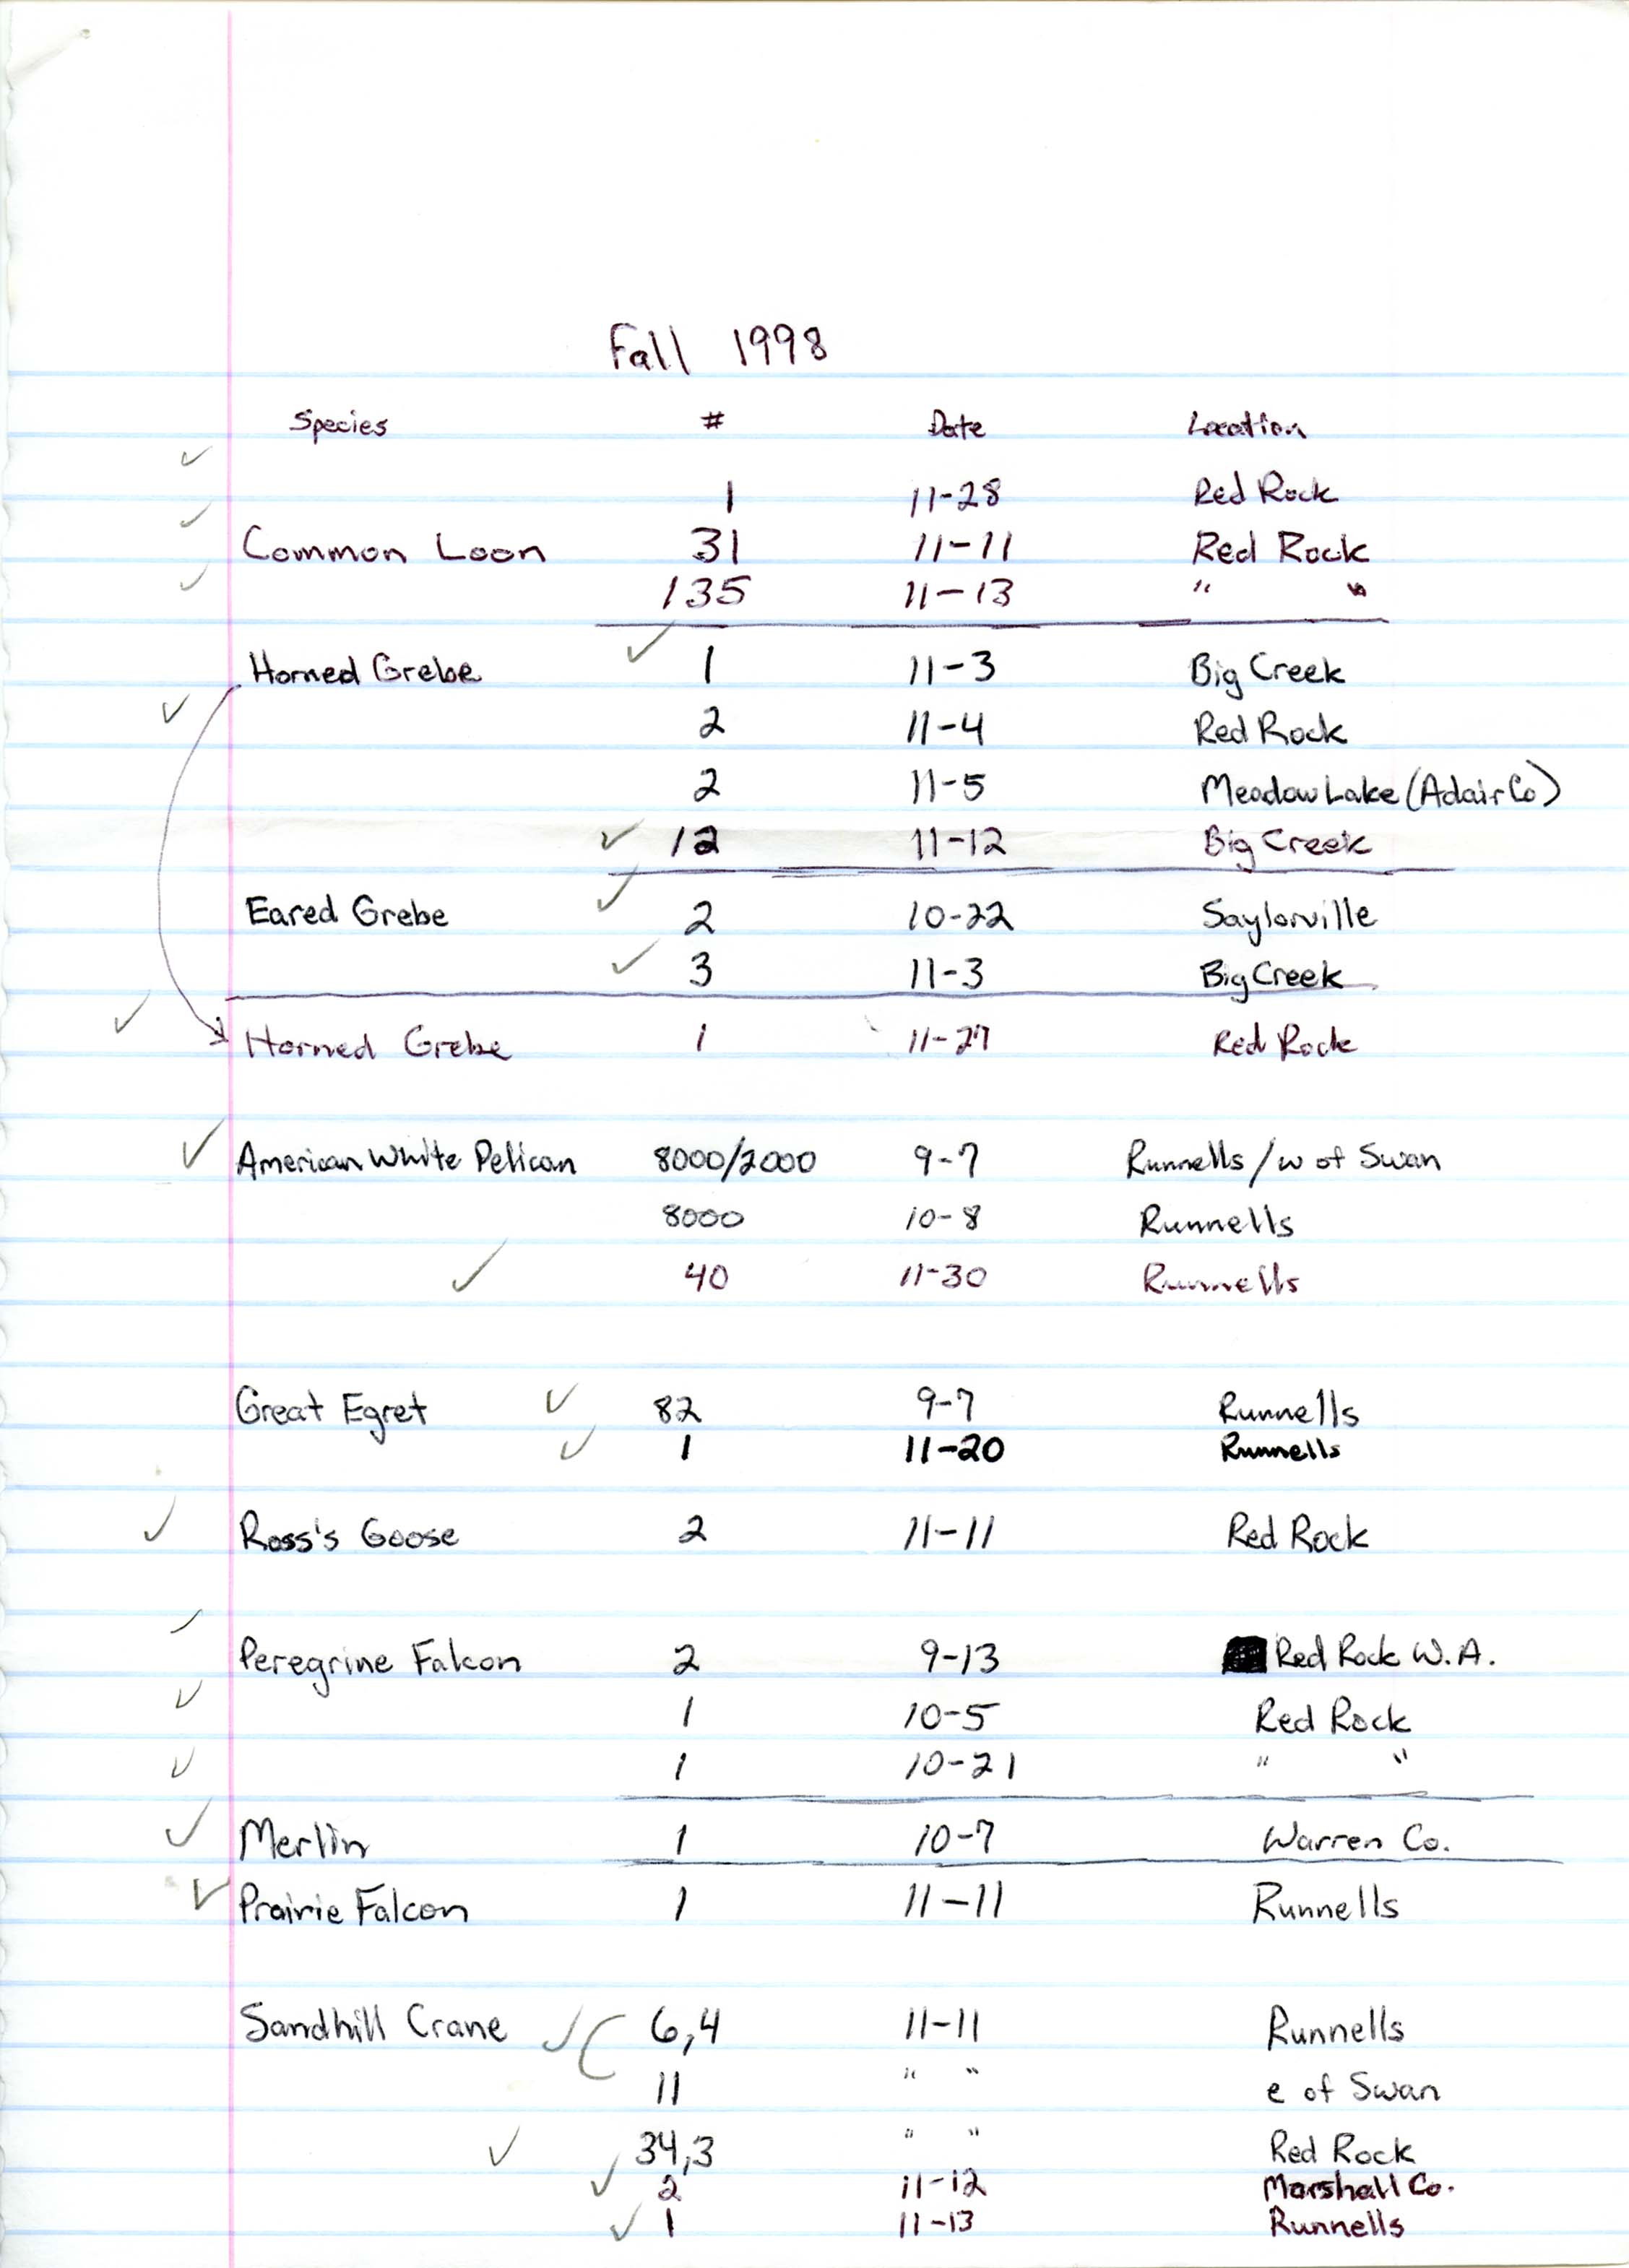 Field notes contributed by Aaron Brees, fall 1998